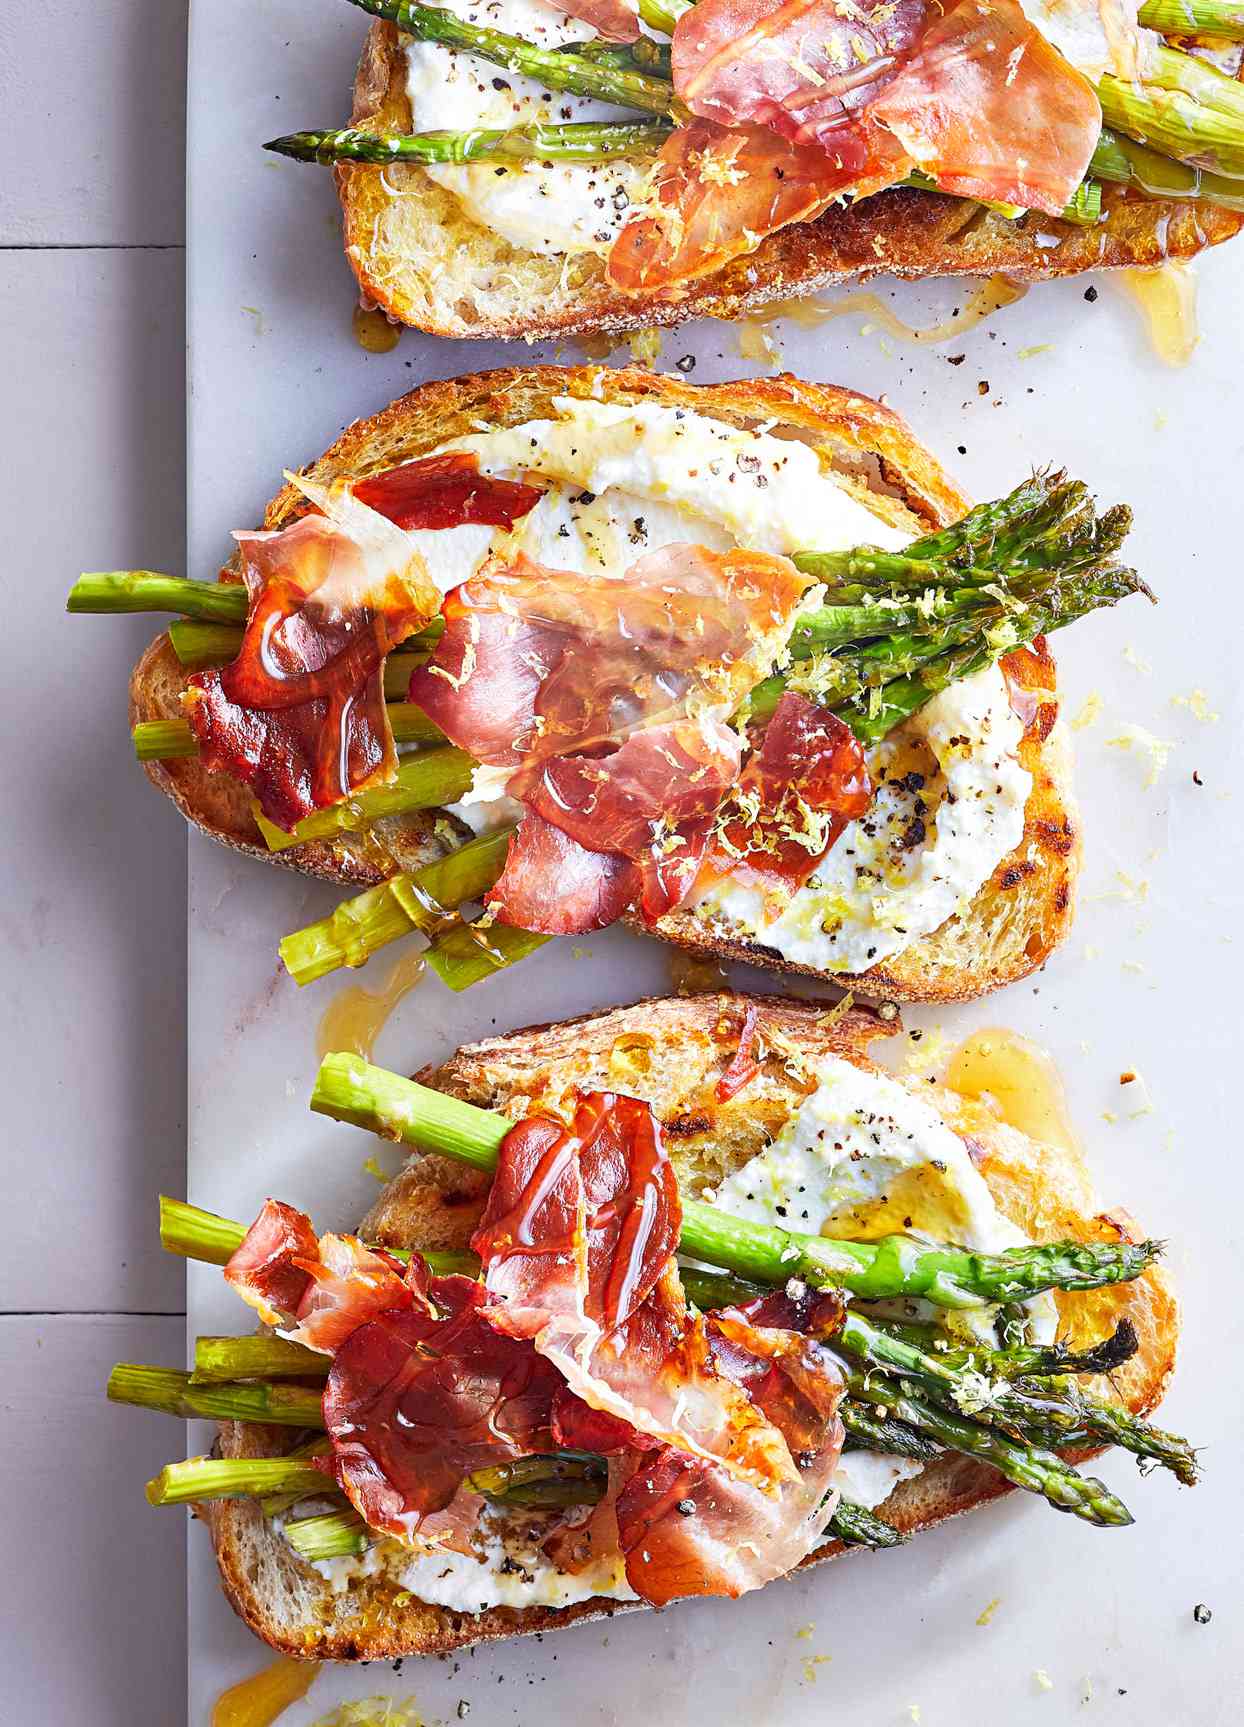 <p>When you want an inventive quick-and-easy brunch dish, these simple toasts are ready in 15 minutes.</p>
                          <p>Related: Asparagus Recipes to Brighten Your Meals</p>
                          